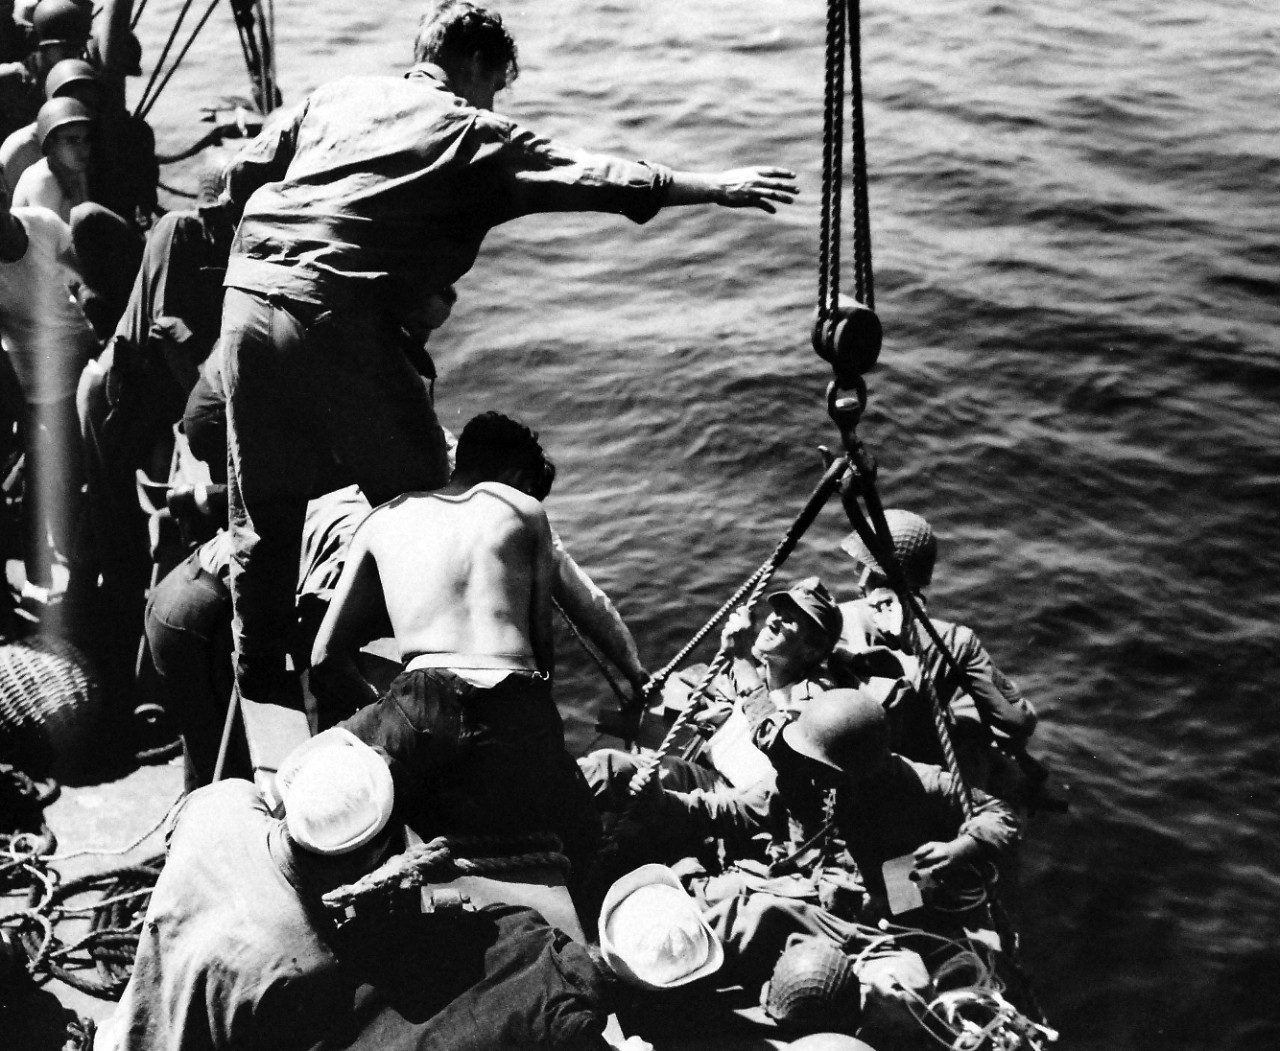 26-G-2002:   Operation Avalanche, September 1943.  Coast Guardsmen Help Wounded Aboard.  U.S. Coast Guardsmen help slightly wounded soldiers, including the German wearing a peaked cloth cap, come aboard the combat transport lying off Paestum, just south of Salerno and one of the invasion points.  Coast Guardsmen manned combat transports and landing craft.    Official Coast Guard Photograph. Photographed through Mylar sleeve.   Courtesy of the Library of Congress: Lot-916.  (2016/05/19).